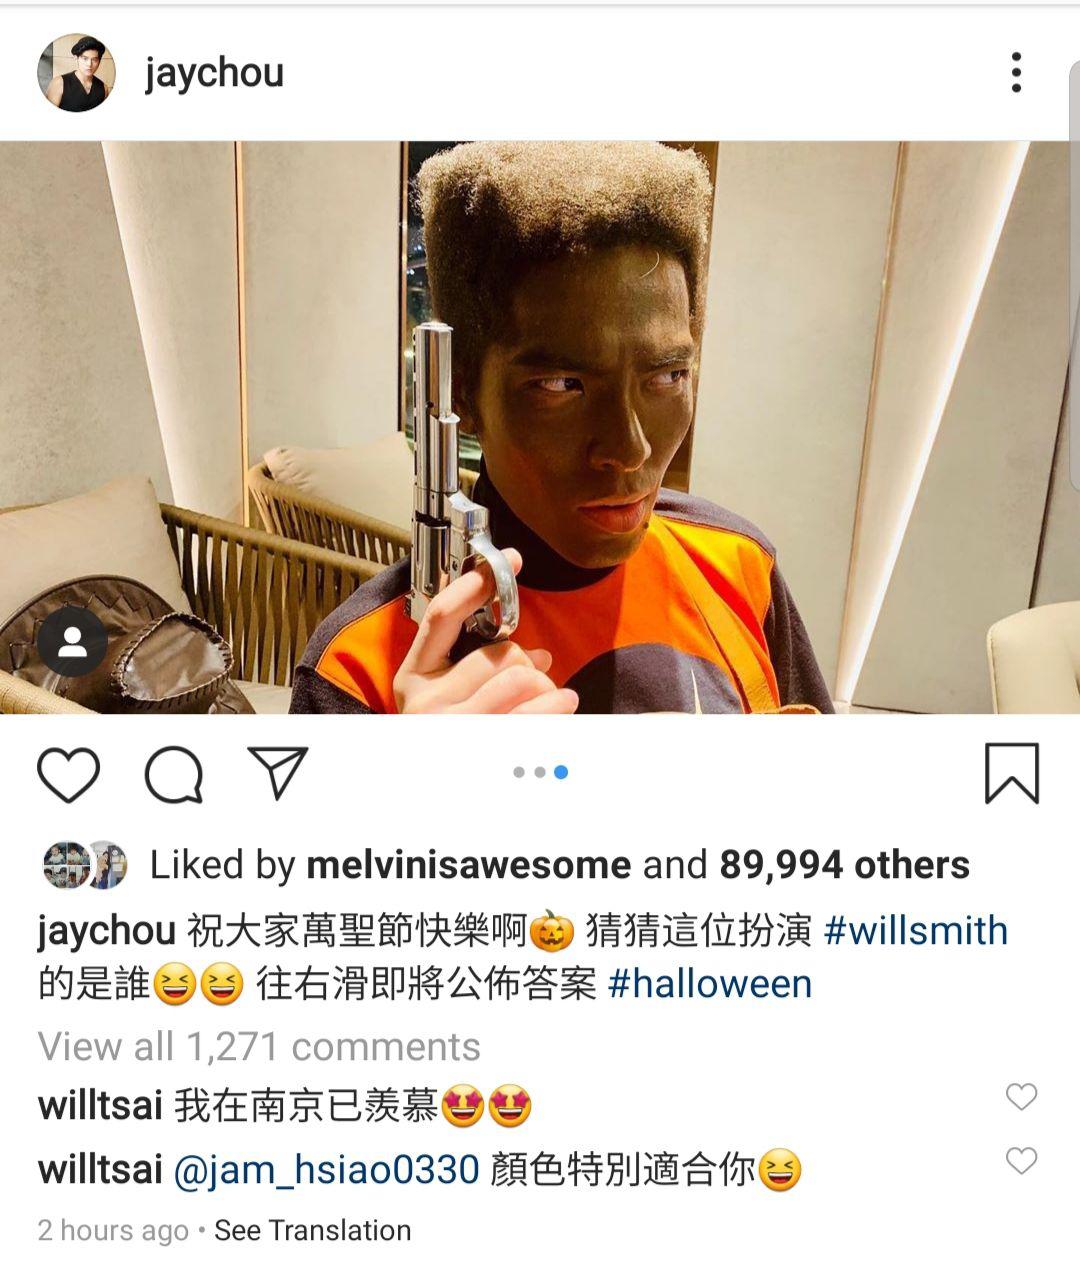 Jay Chou's instagram post of Jam Hsiao's black face